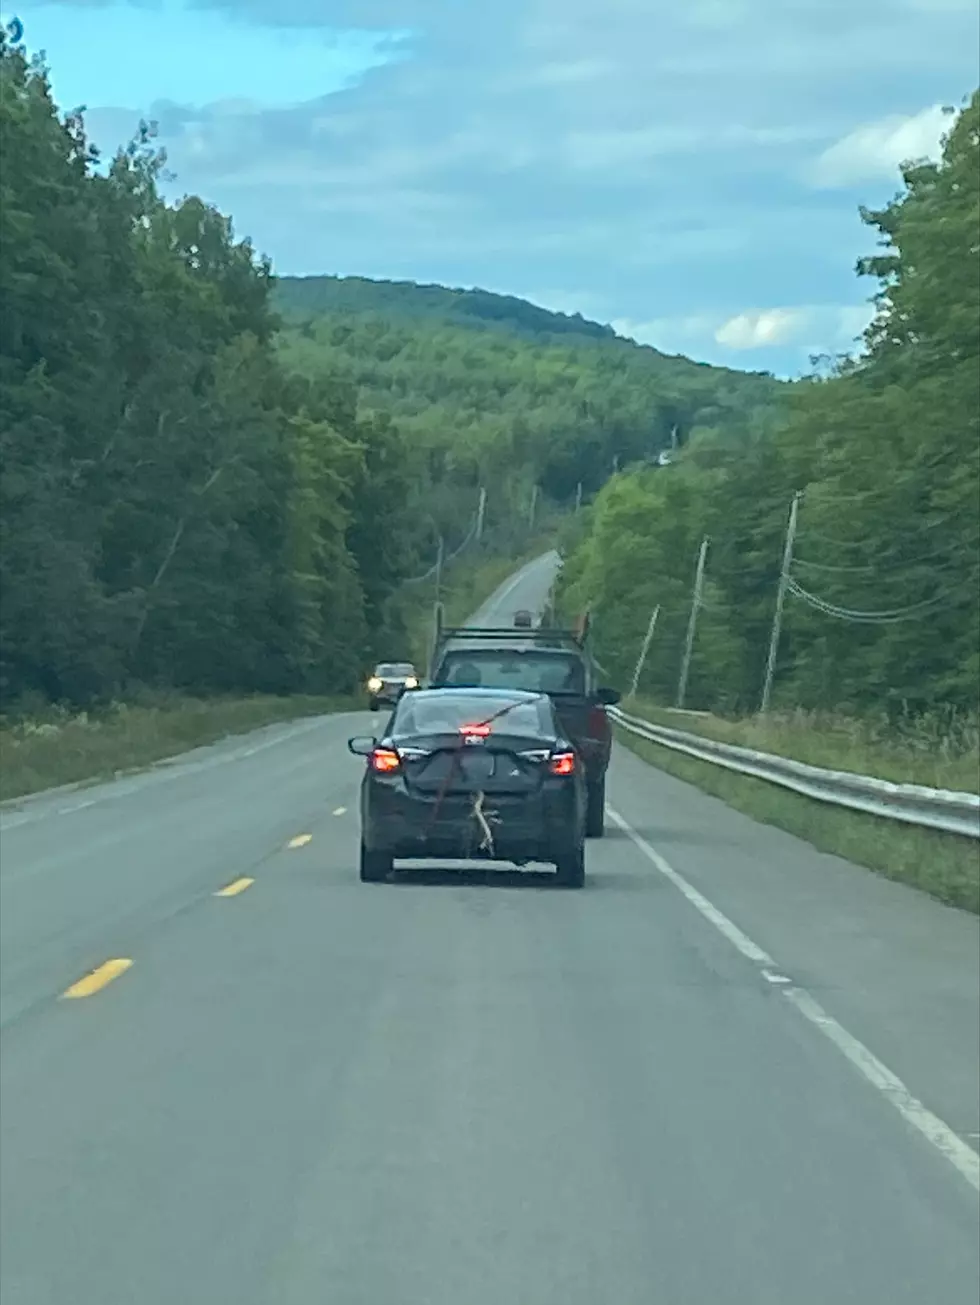 An Adventurous Ride On A Northern Maine Road Could Have Ended Badly